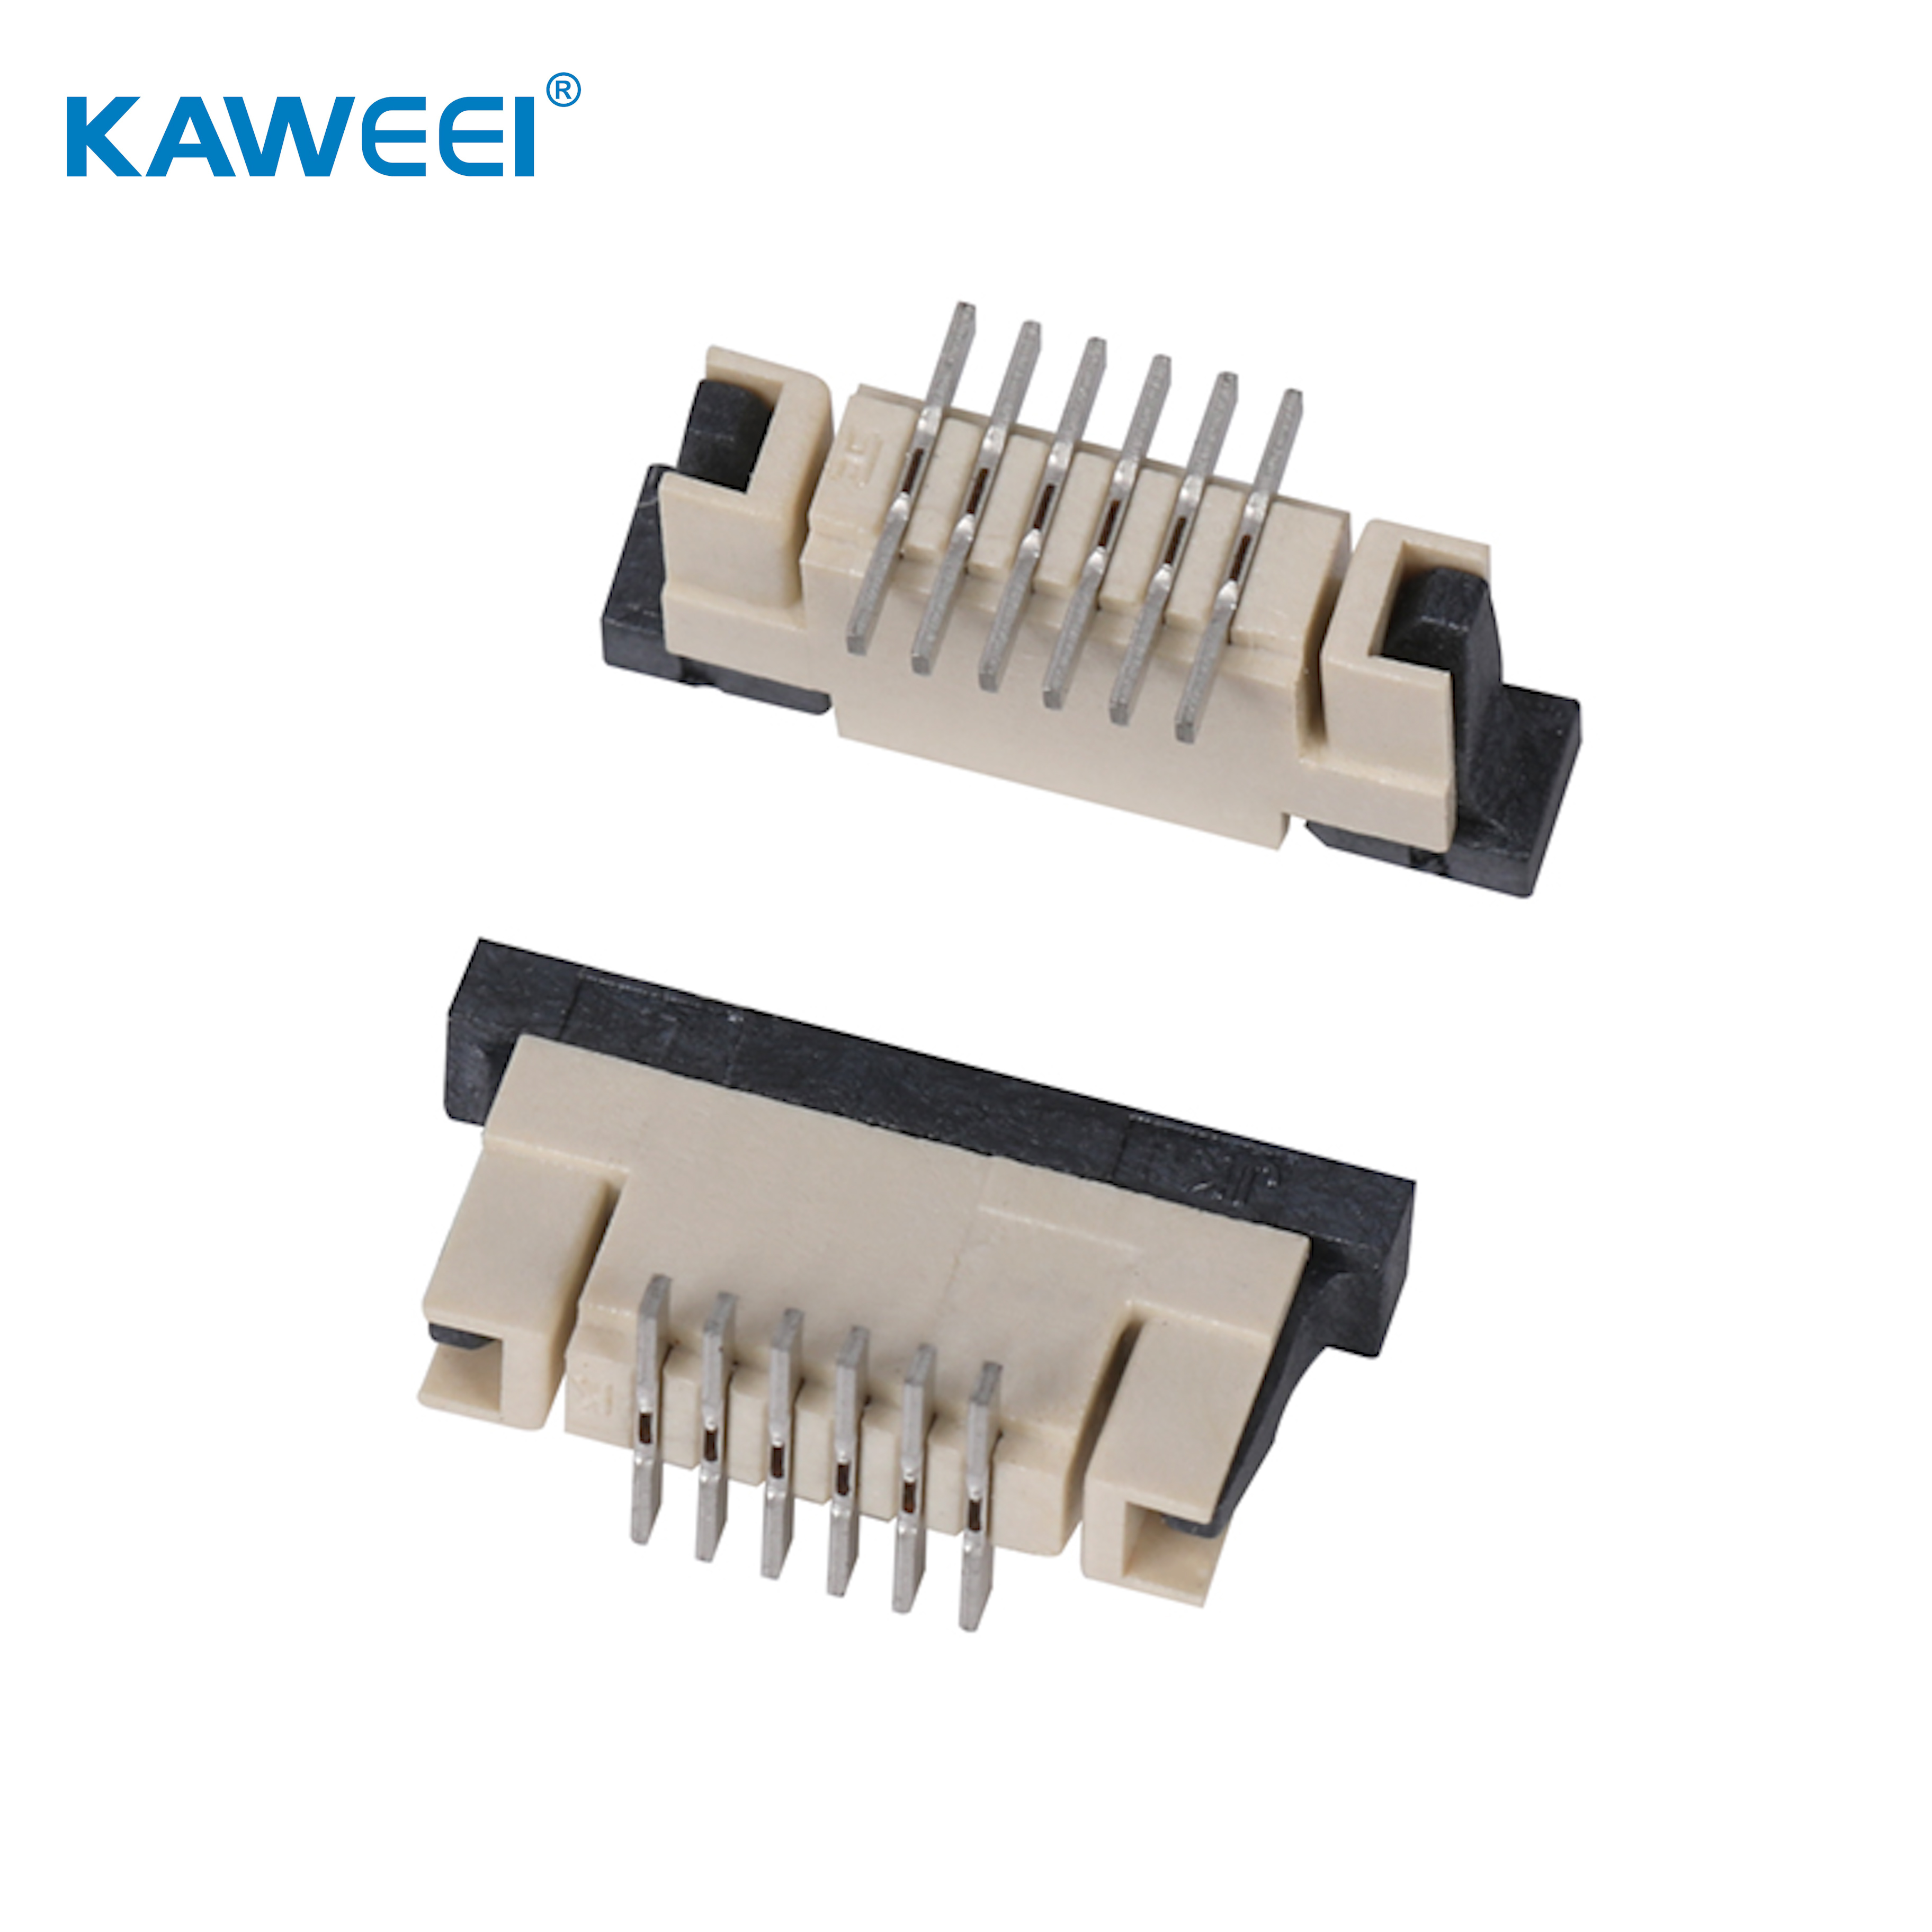 1.0mm pitch ffc/fpc zip vertical SMT type connector wire to board connector